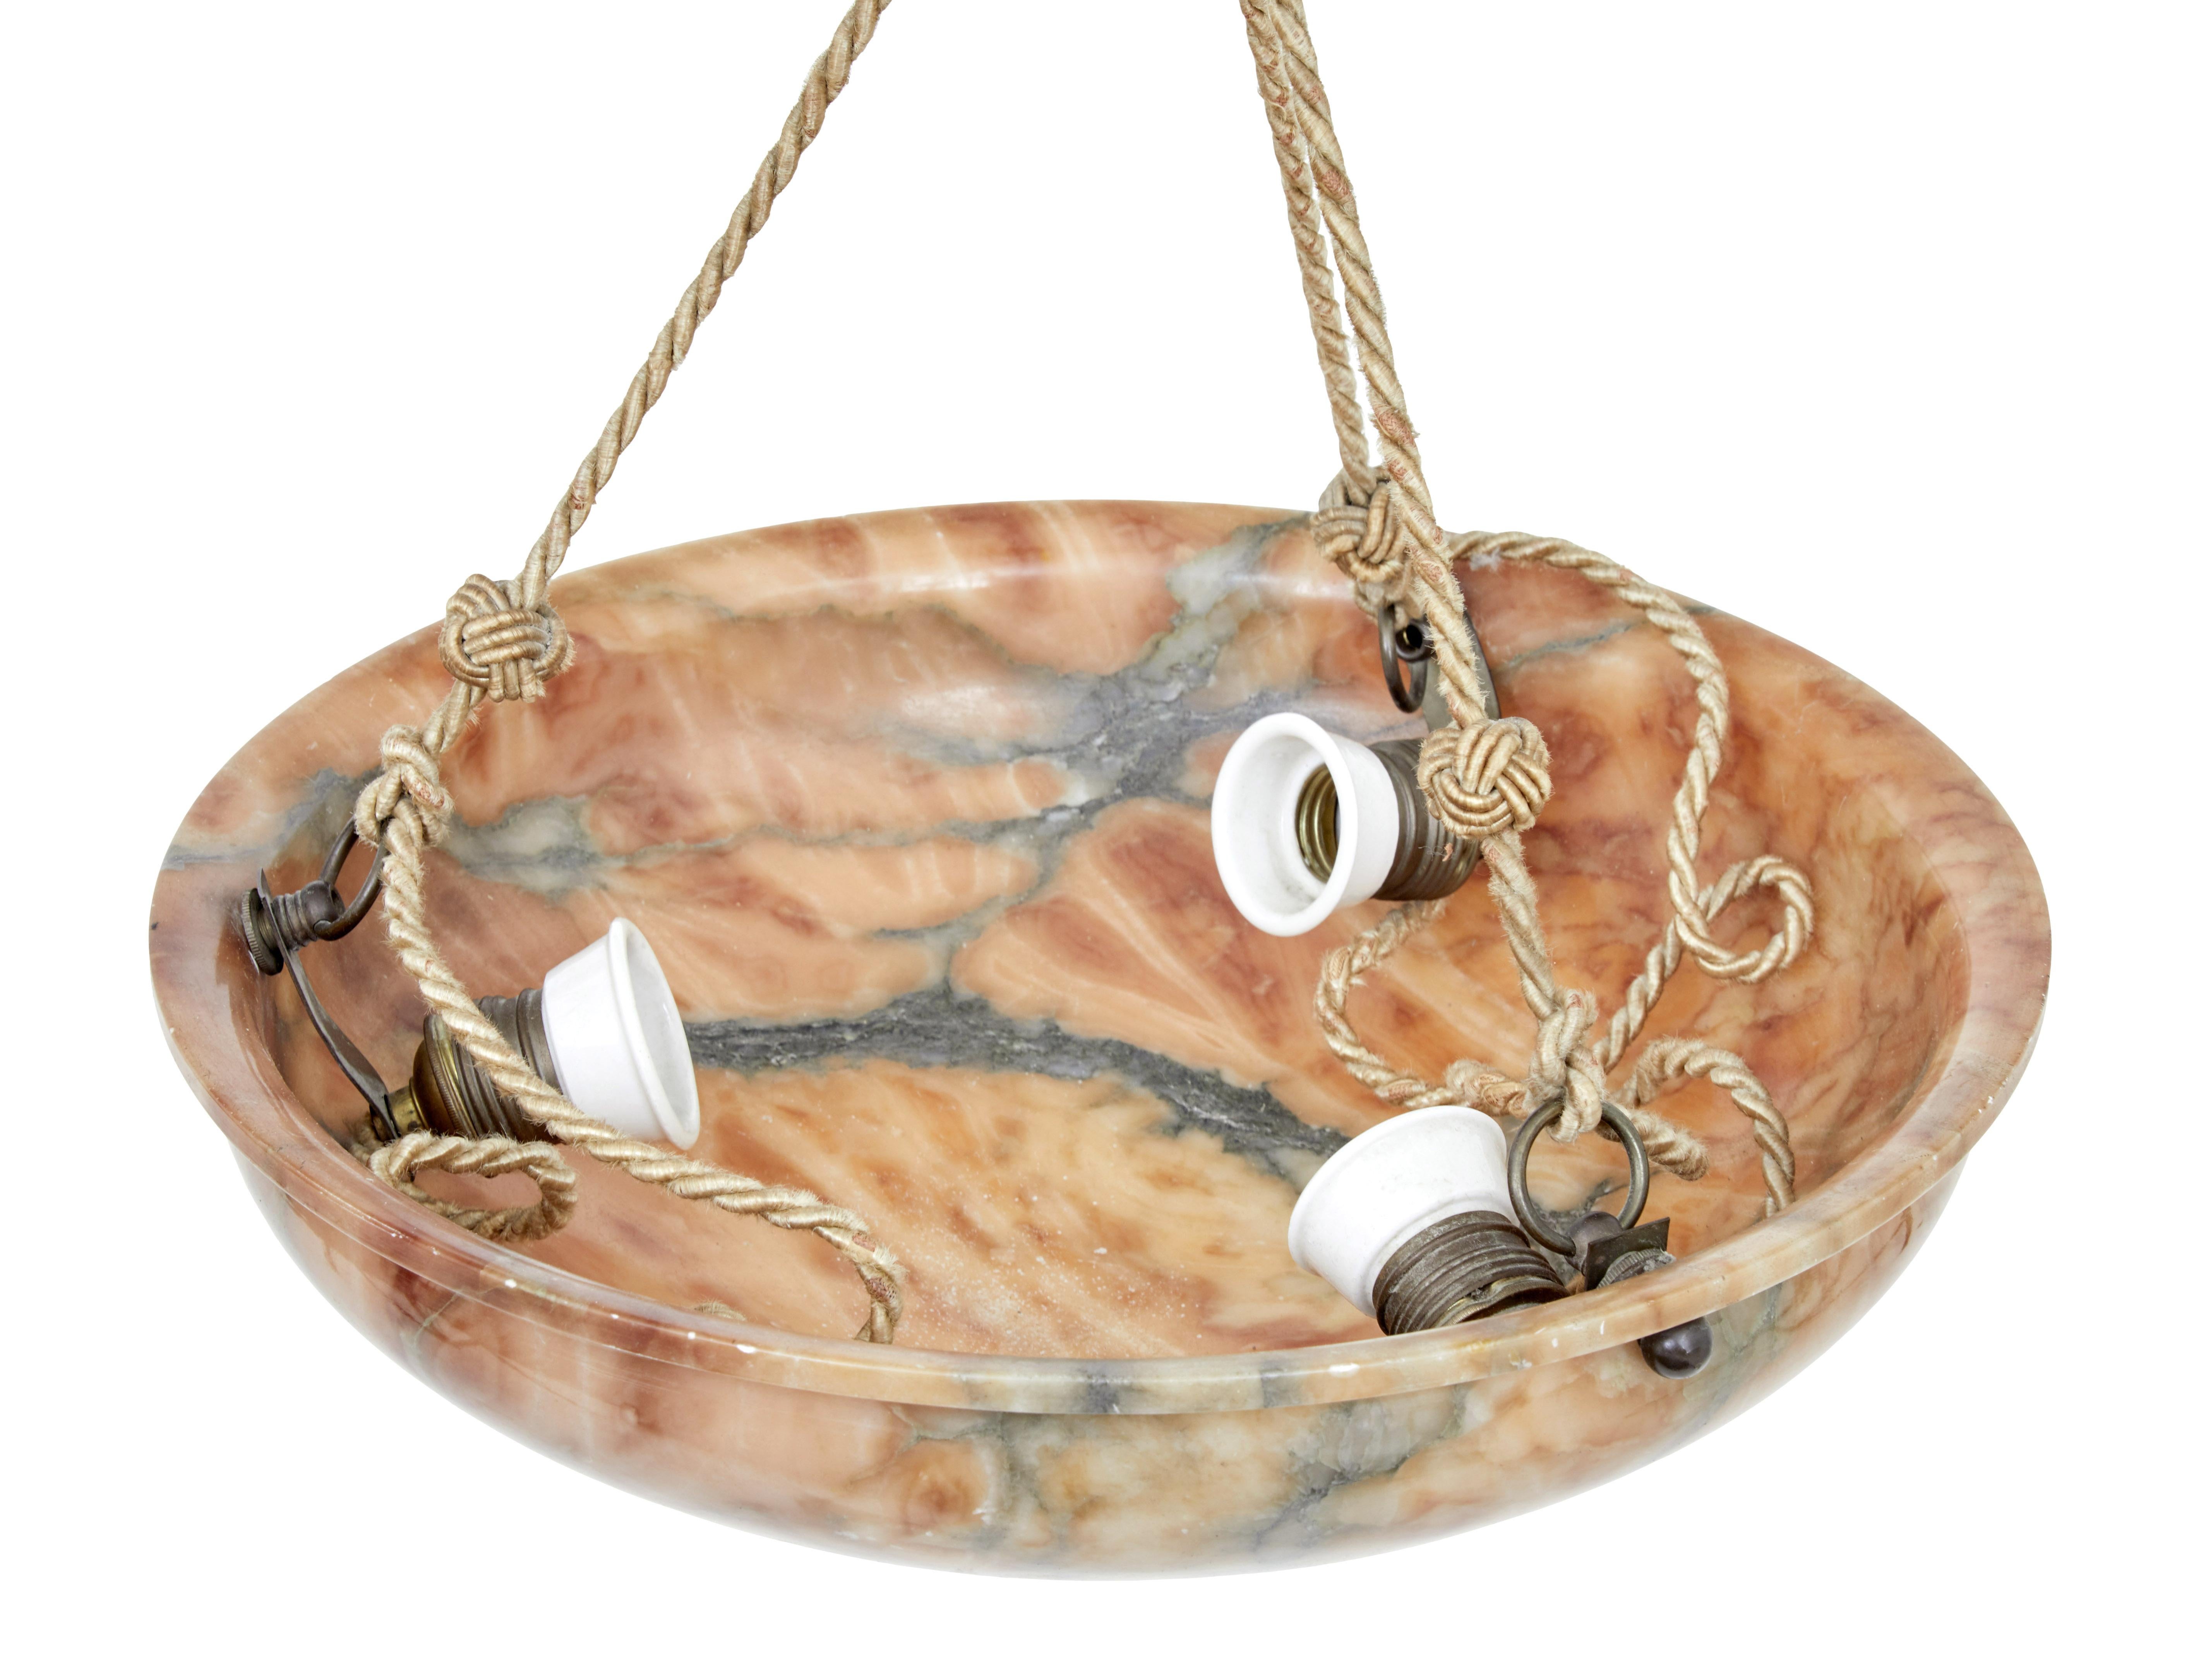 Art Deco alabaster dish ceiling light, circa 1920.

Art Deco period ceiling light made from carved alabaster. Ceiling rose of the same stone, with a 16 inch diameter bowl suspended by 3 ropes. Fitted with 3 bulb holders.

Minor surface marks. We